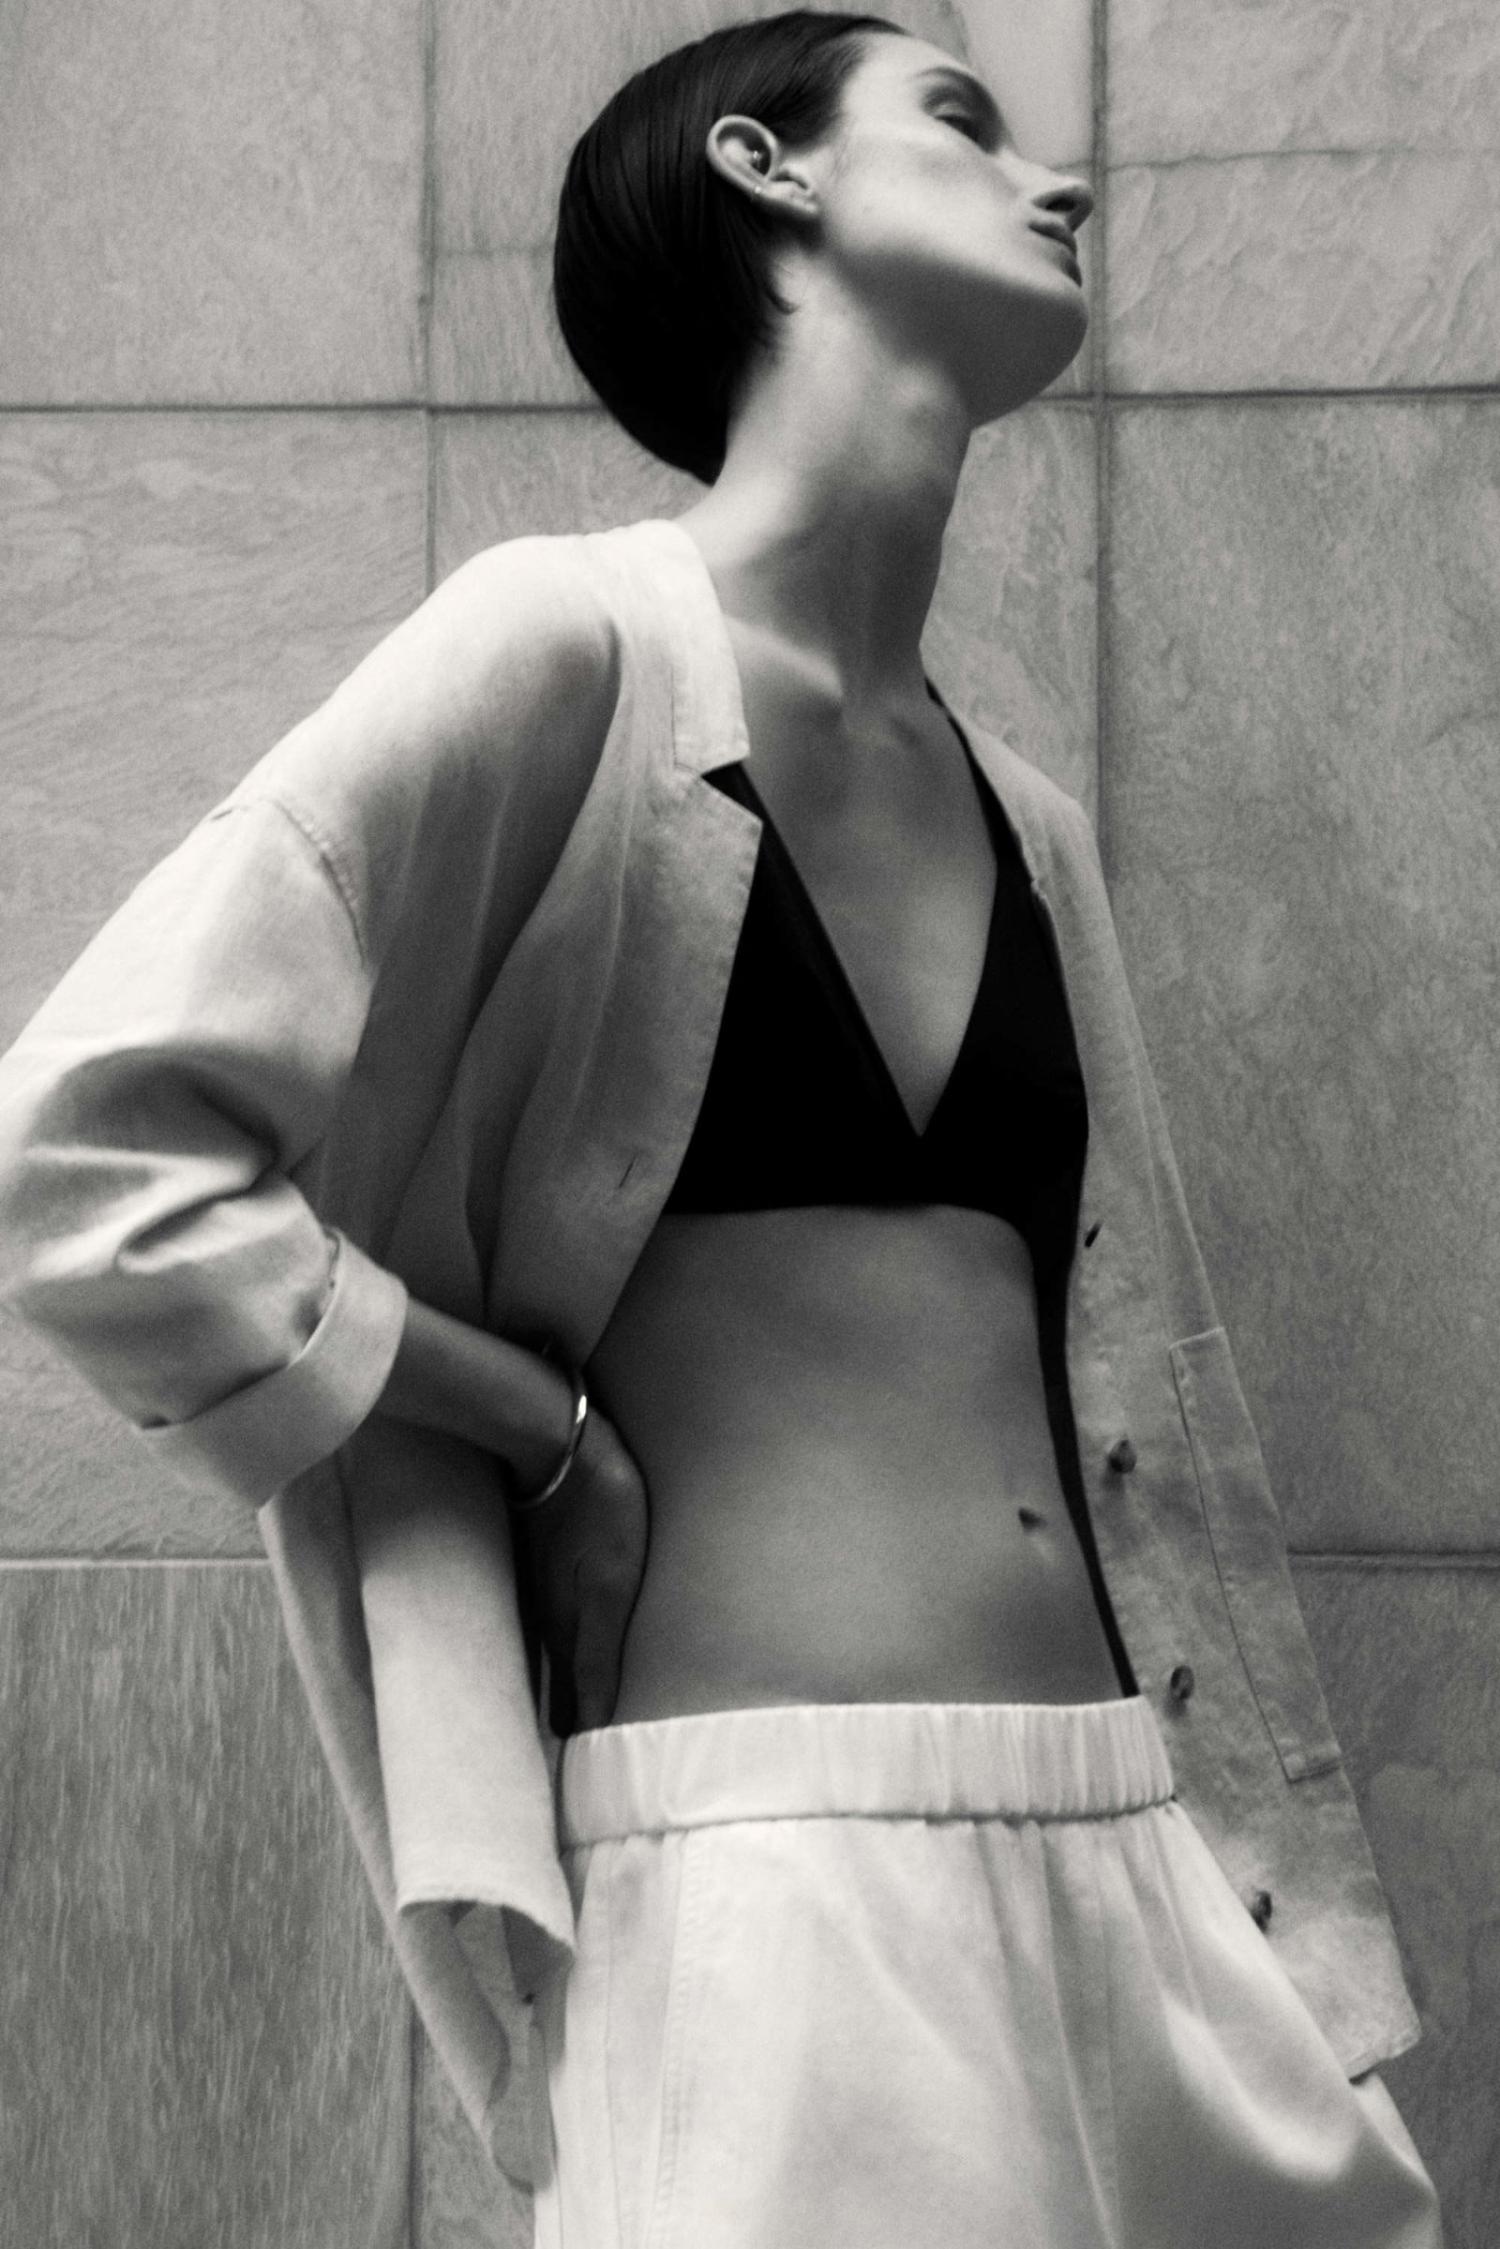 Clothing & Accessories: COS LILAC LINEN OPEN COLLAR SHIRT / COS BLACK TRIANGLE BIKINI TOP / COS WHITE COTTON-LINEN SHORTS Marte Mei van Haaster by Robin Galiegue for Core by COS Summer 2021 Ad Campaign